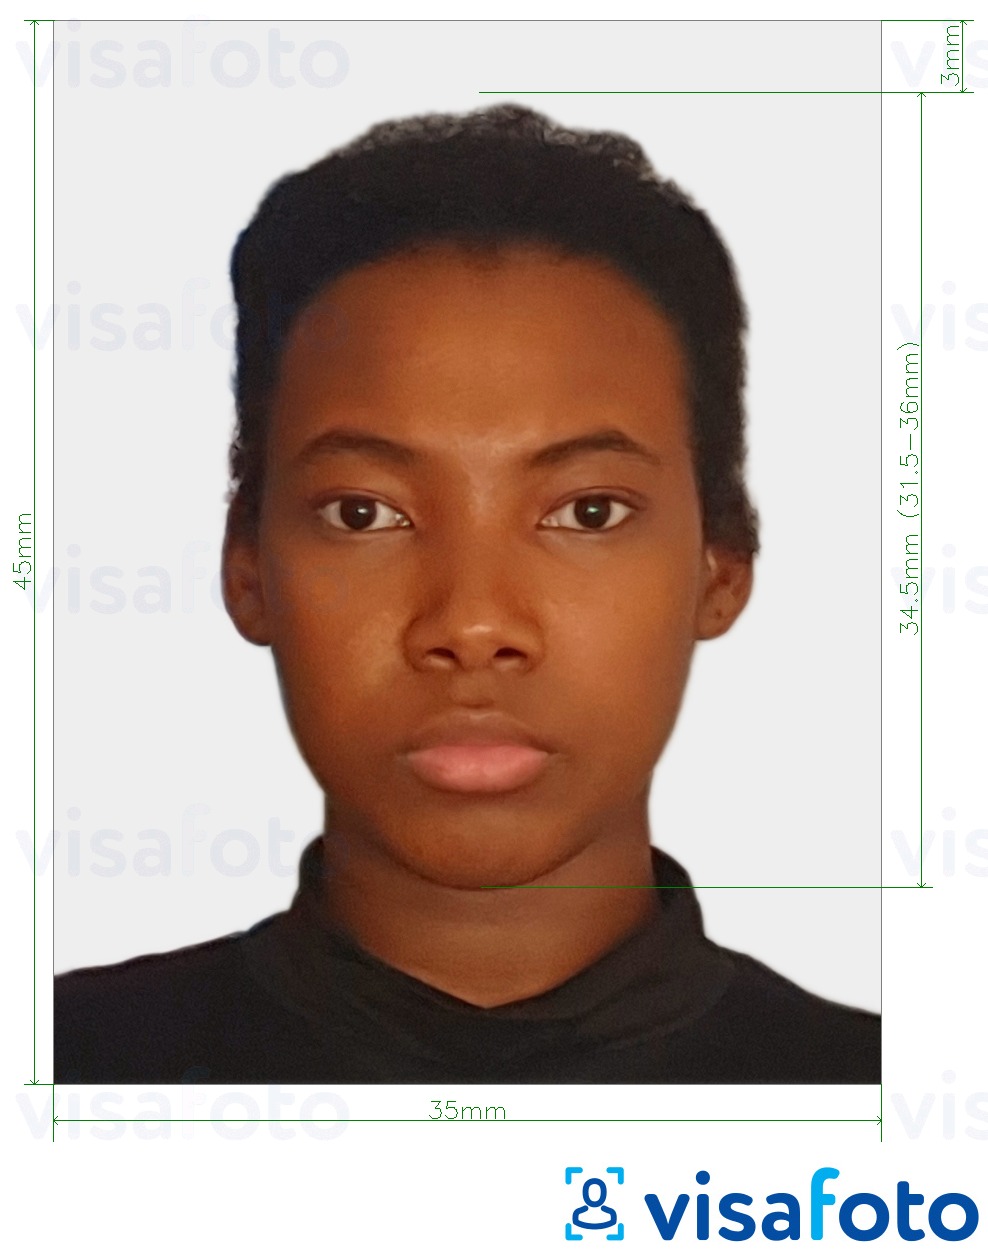 Example of photo for Zambia visa 35x45 mm (3.5x4.5 cm) with exact size specification